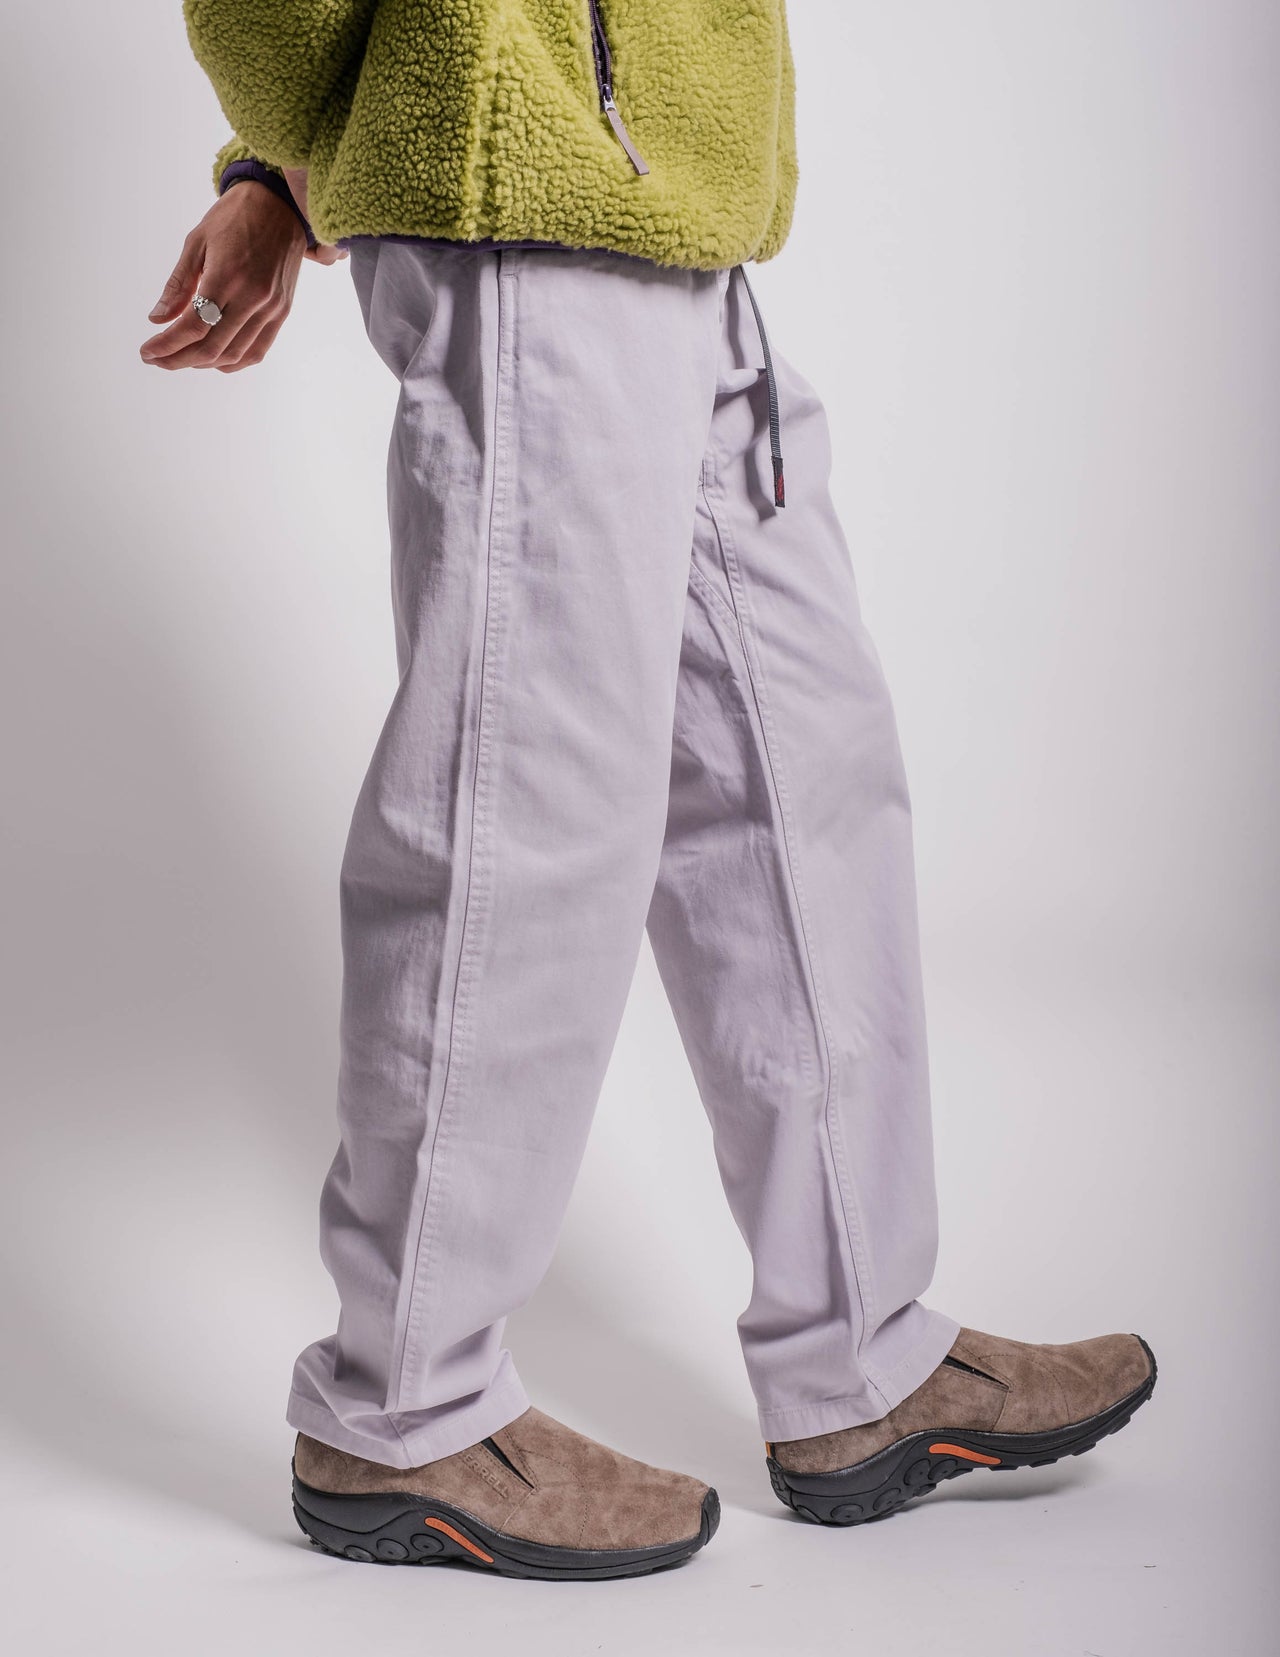 Gramicci Pant in Dusty Lavender